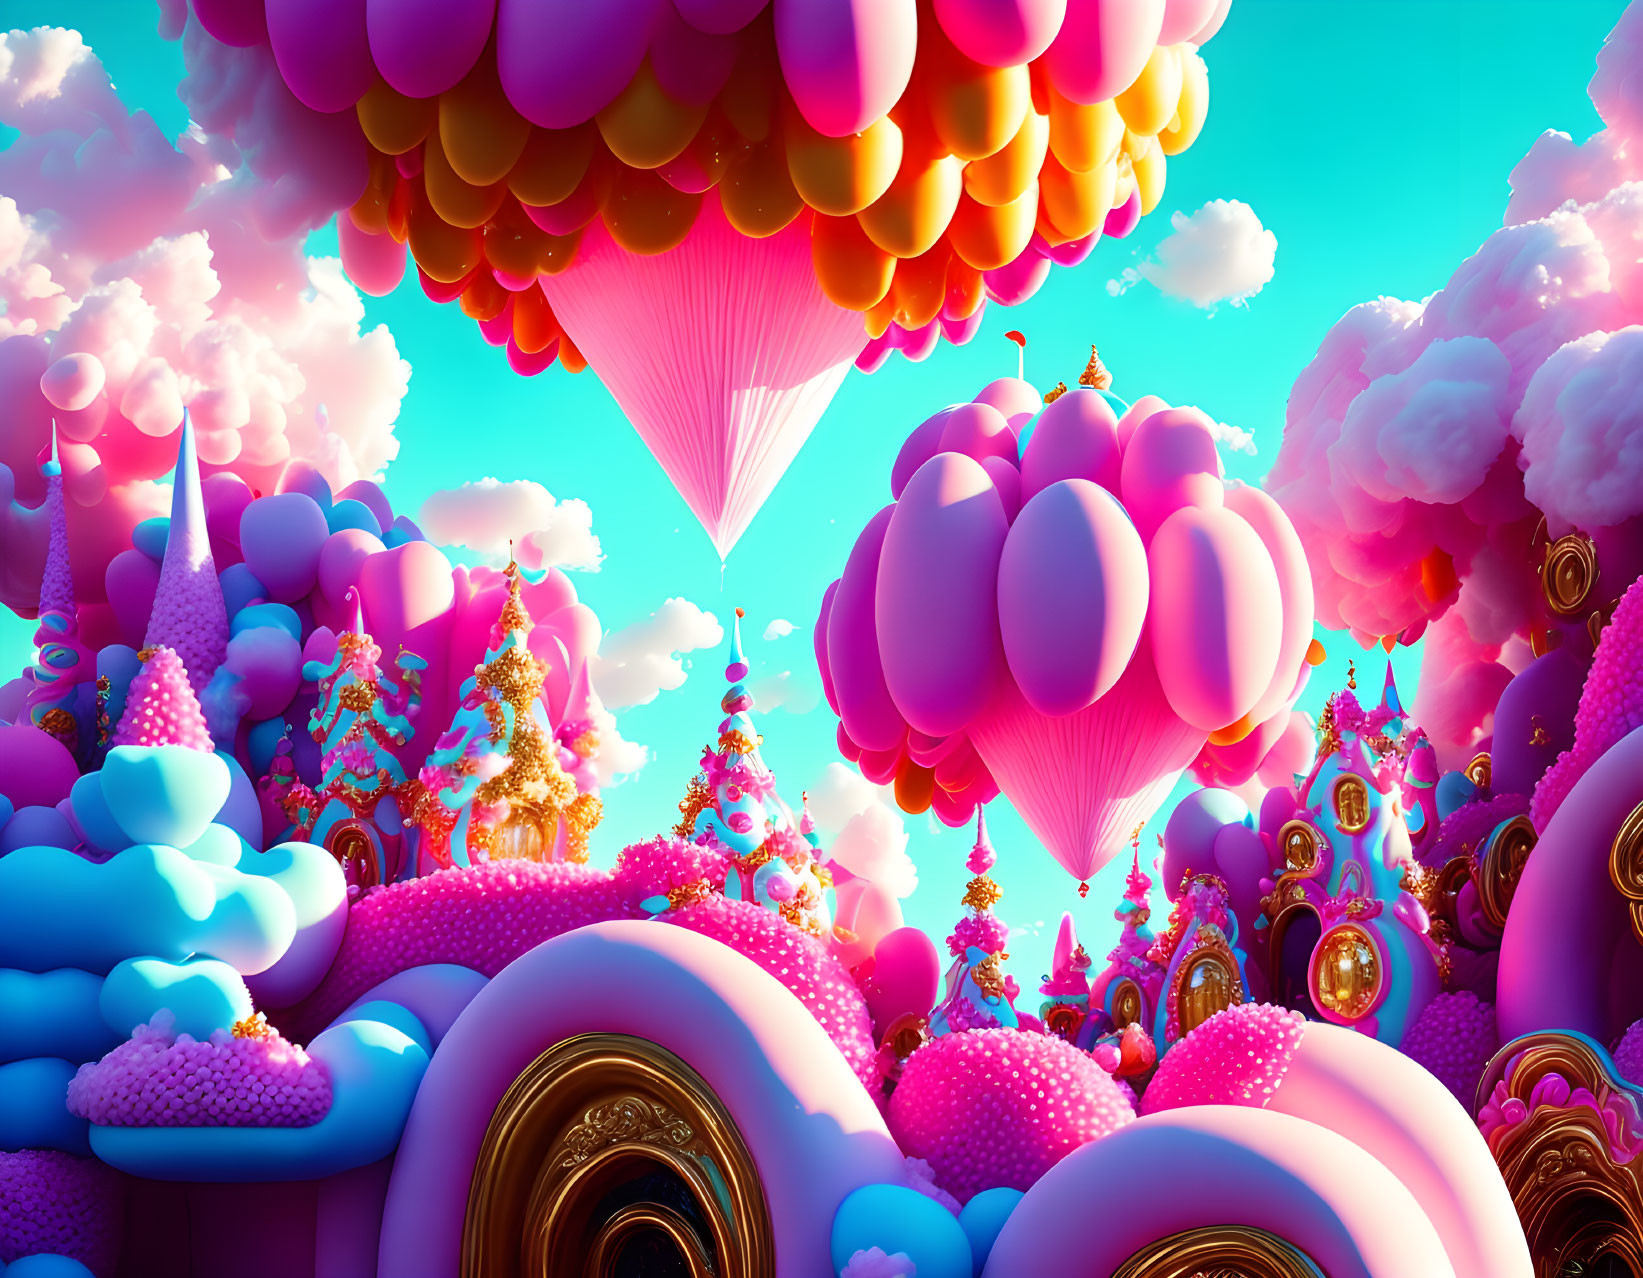 Fantastical landscape with pink and gold structures and hot-air balloons